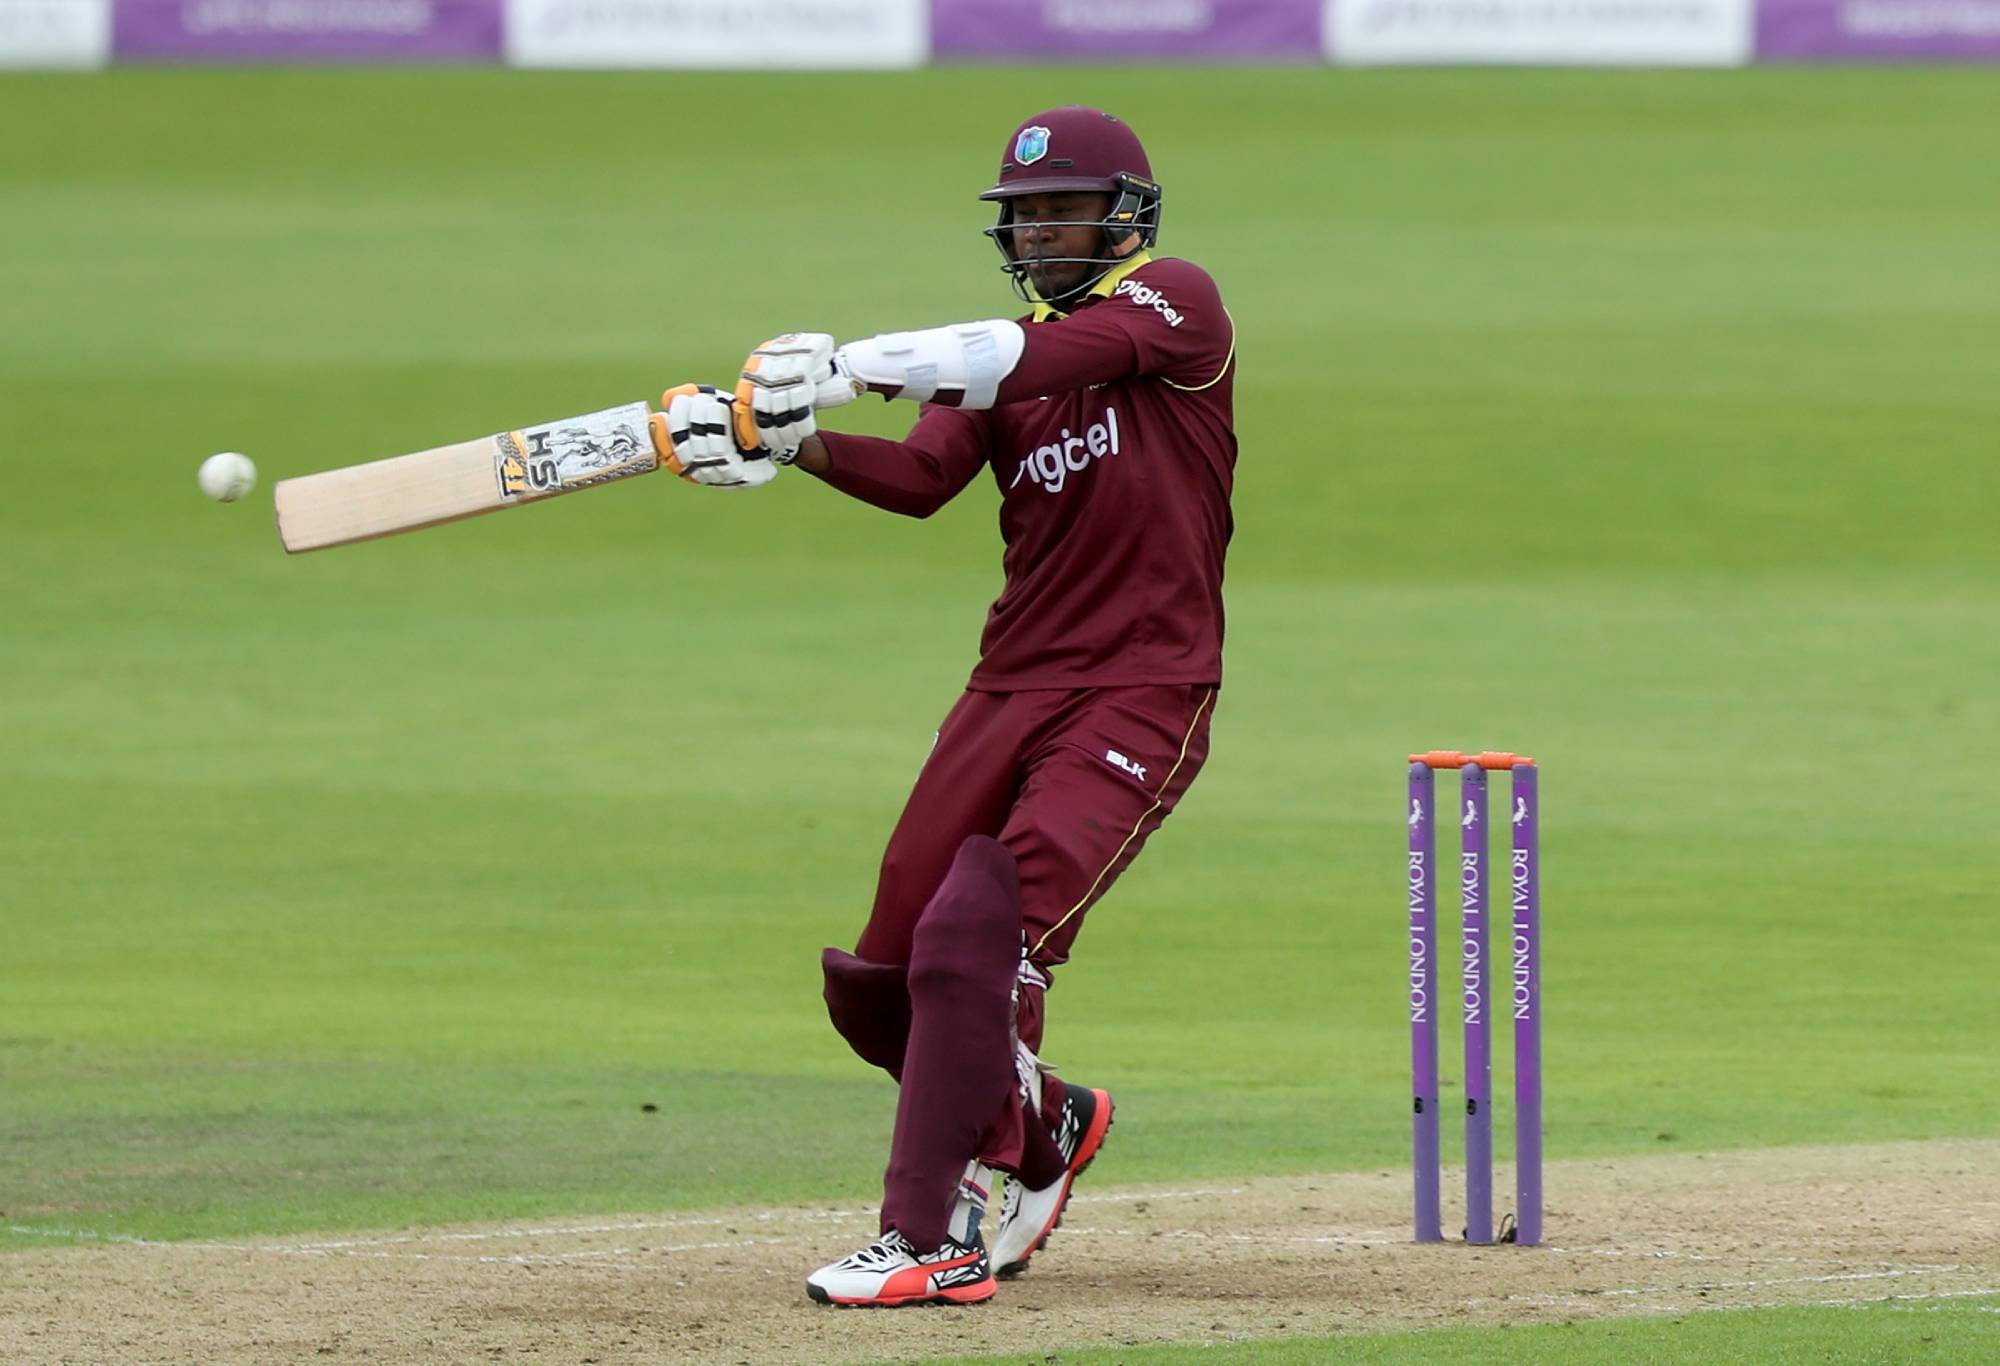 West Indies' Marlon Samuels hits out during the fifth Royal London One Day International at the Ageas Bowl, Southampton. (Photo by Simon Cooper/PA Images via Getty Images)